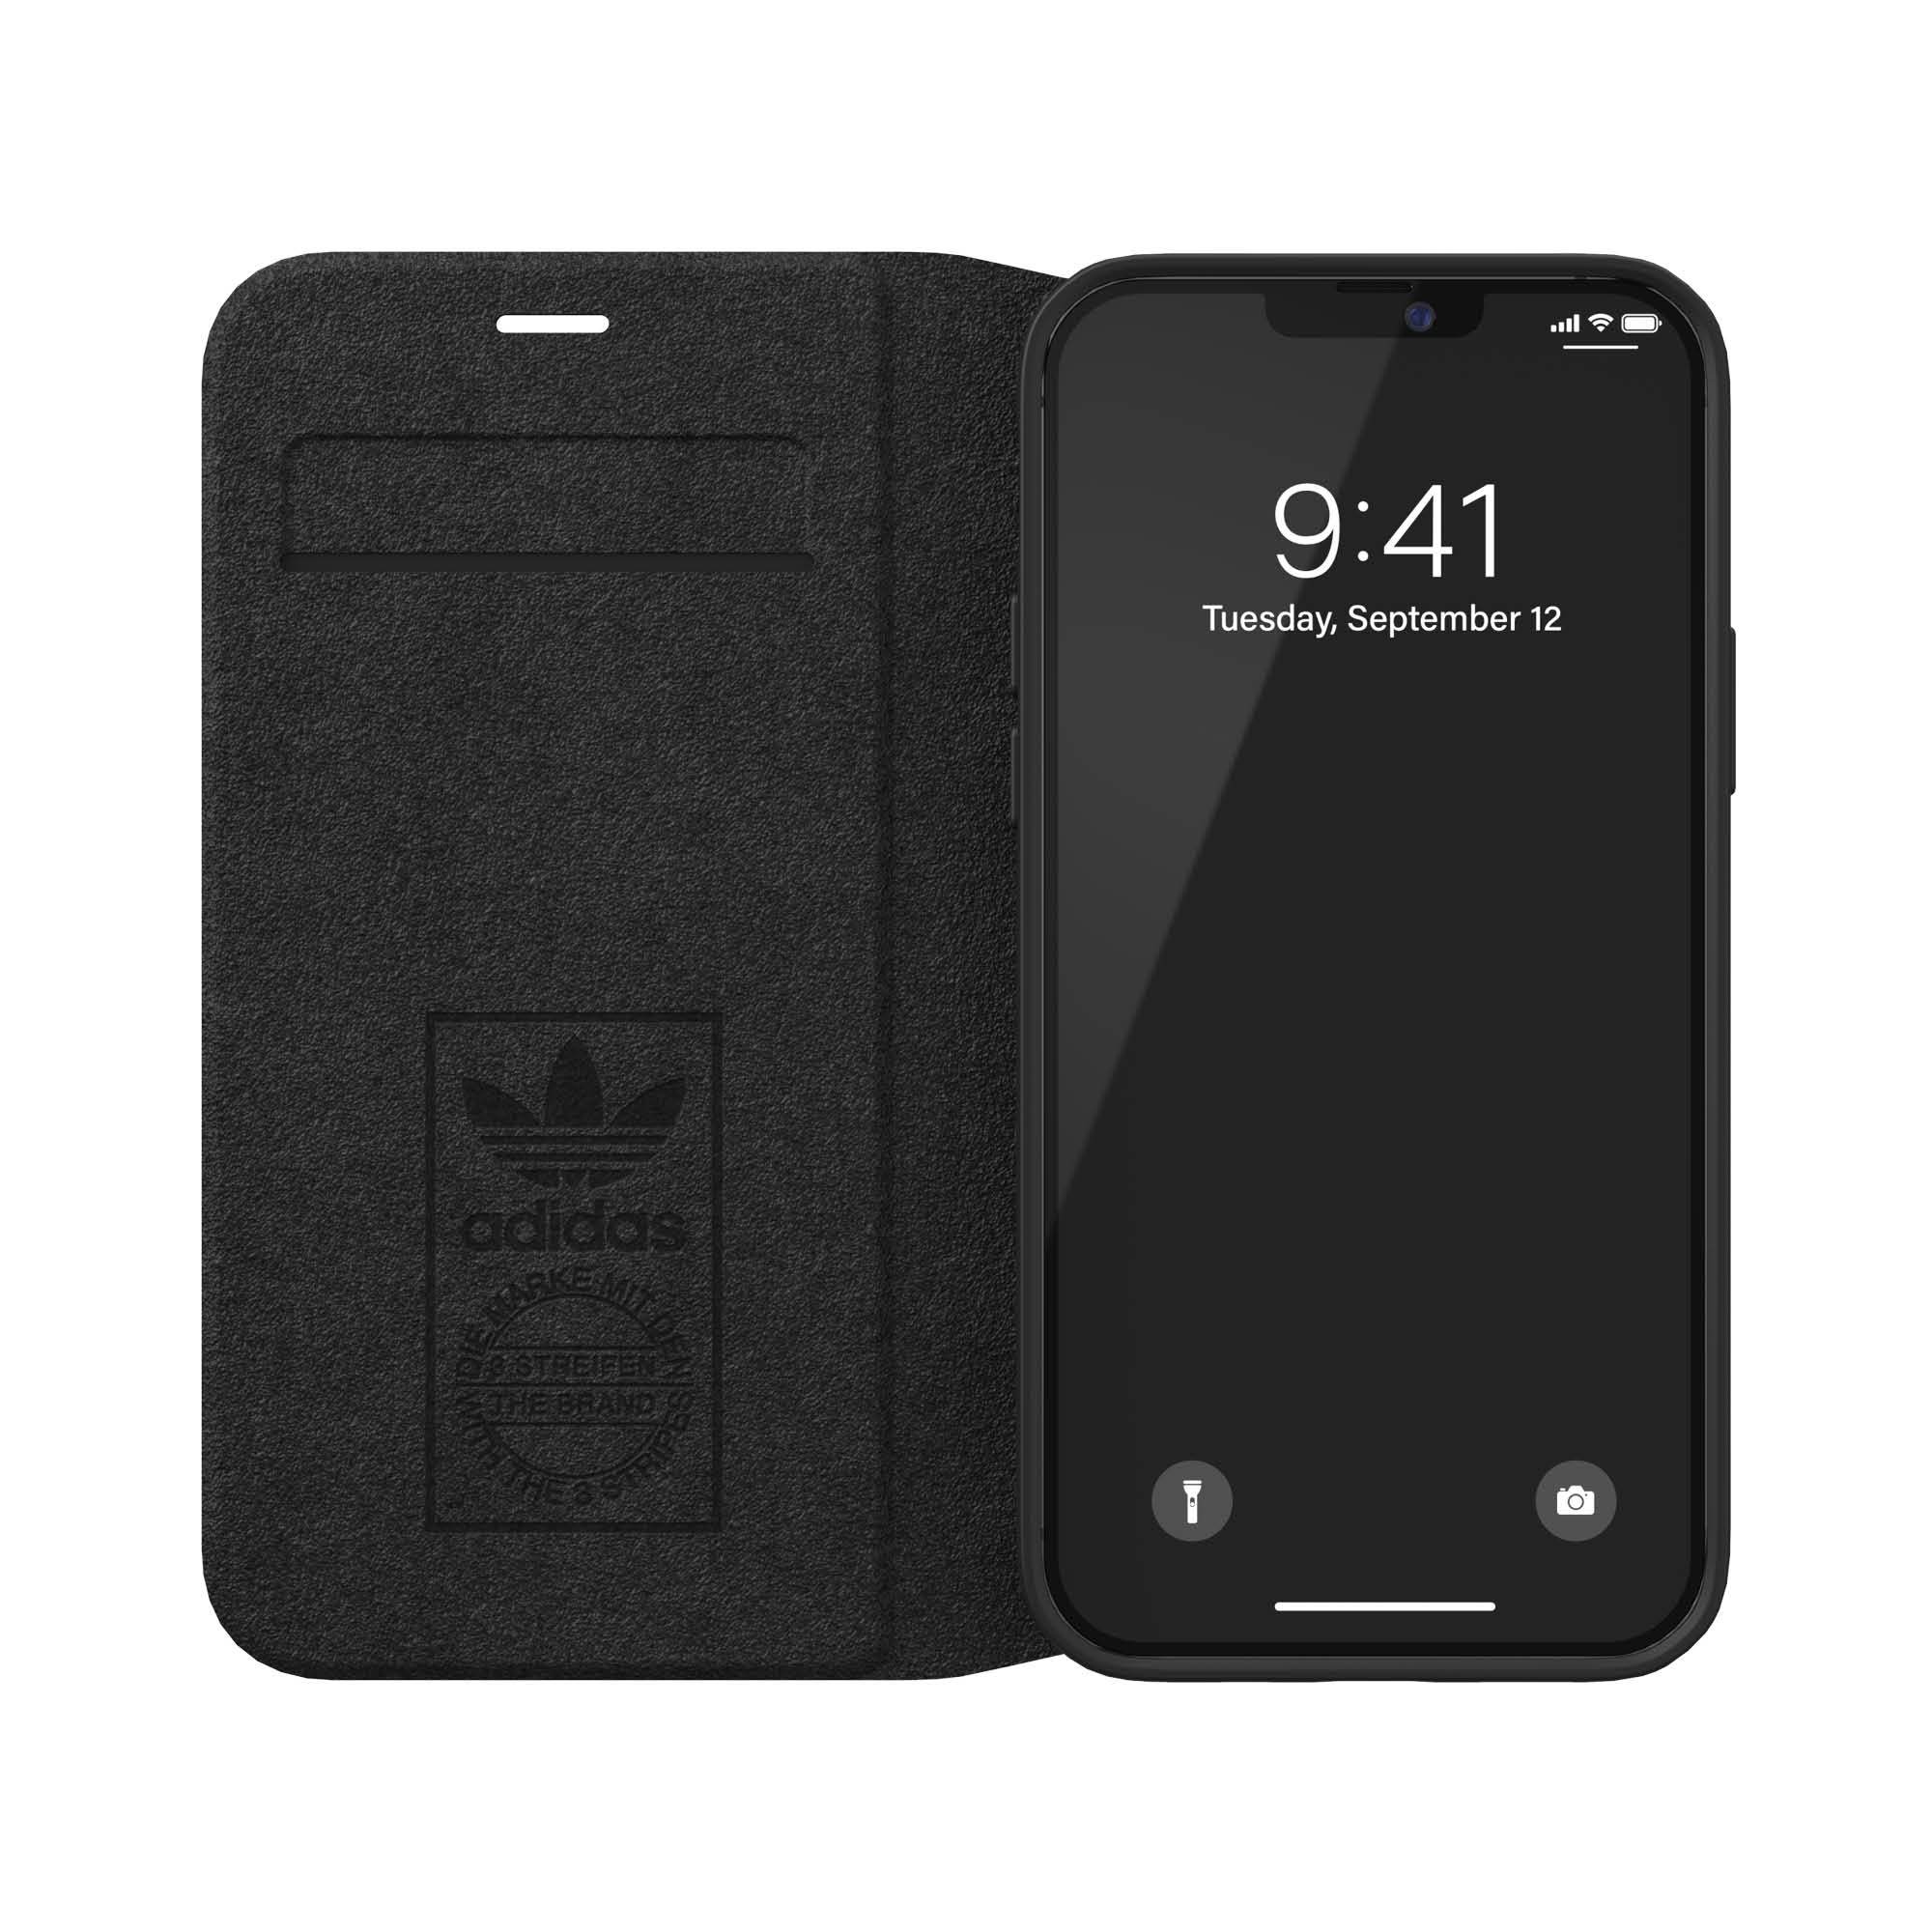 Adidas SAMBA Apple iPhone 12 / 12 Pro Folio Case - Booklet cover w/ 3 Stripes & Trefoil Design, Scratch & Drop Protection, 1x Card Holder, Wireless Charging Compatible - Black/White